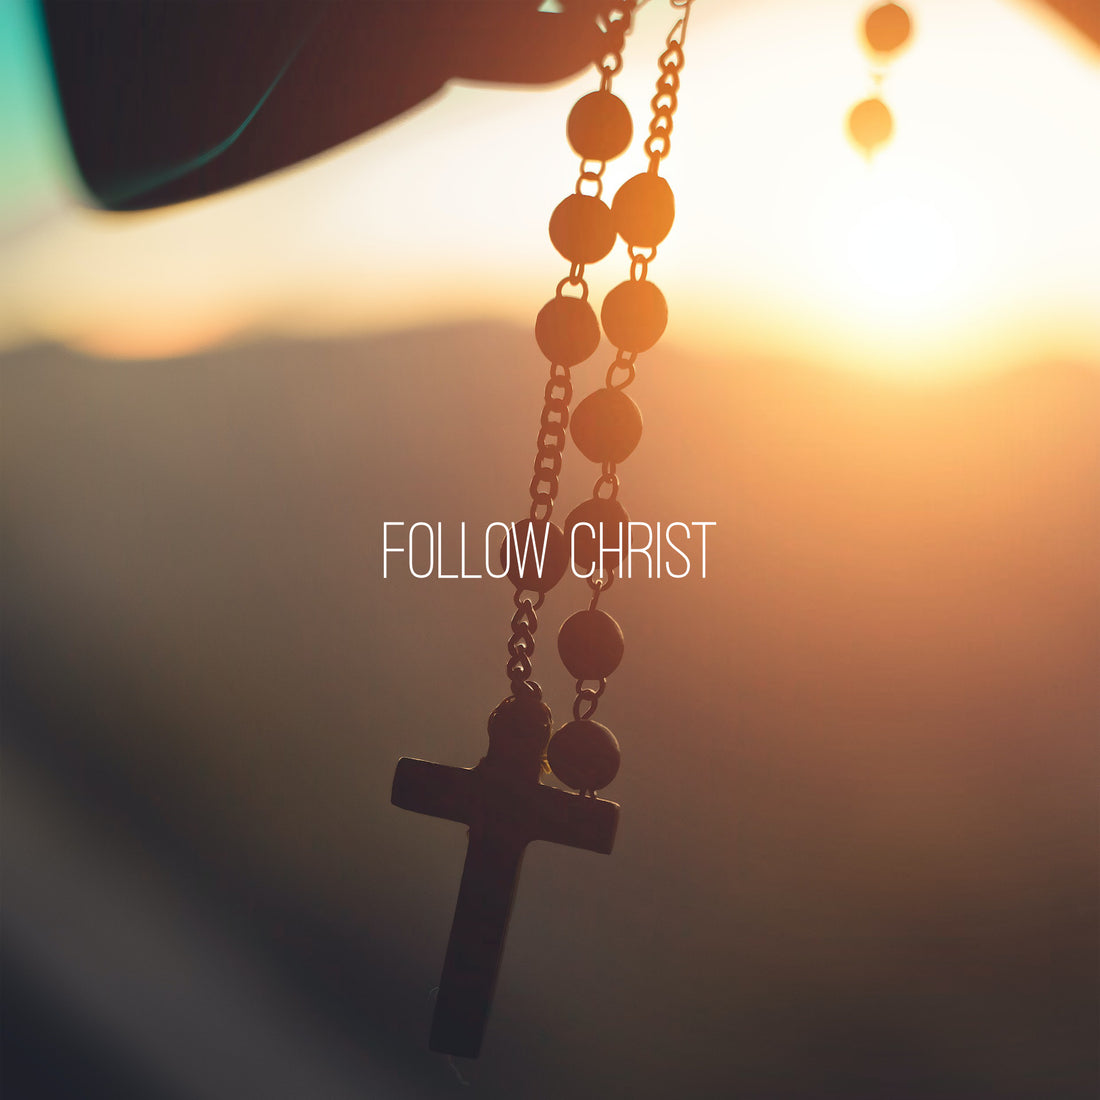 Deny Yourself; Pick Up Your Cross Daily; And Follow Me.